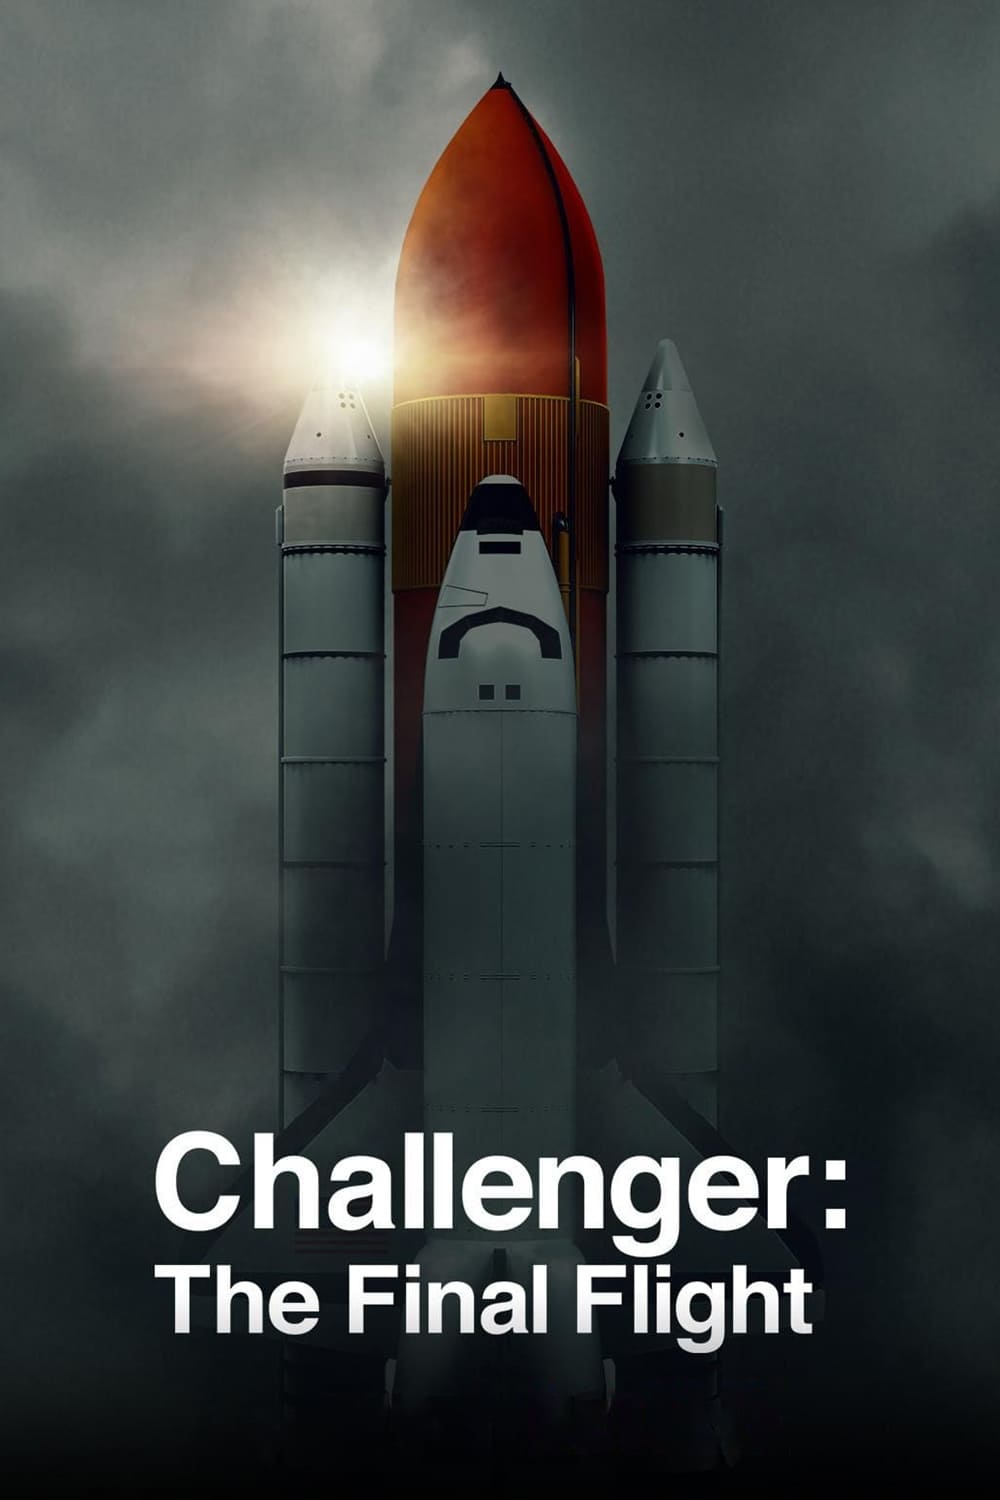 Challenger: The Final Flight TV Shows About Tragedy